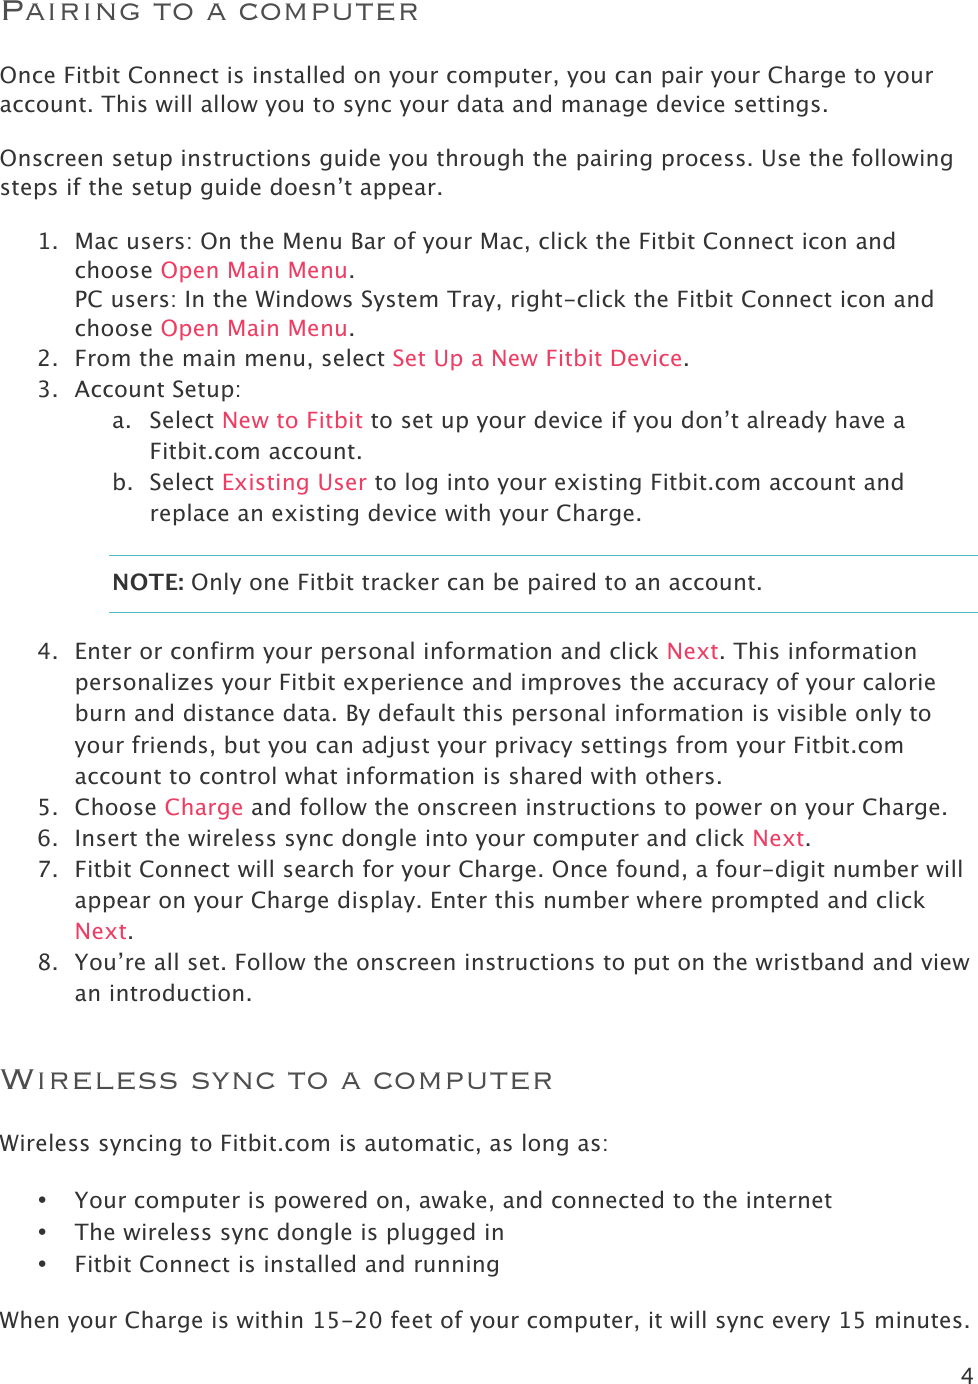 4  Pairing to a computer Once Fitbit Connect is installed on your computer, you can pair your Charge to your account. This will allow you to sync your data and manage device settings.  Onscreen setup instructions guide you through the pairing process. Use the following steps if the setup guide doesn’t appear.  1. Mac users: On the Menu Bar of your Mac, click the Fitbit Connect icon and choose Open Main Menu.  PC users: In the Windows System Tray, right-click the Fitbit Connect icon and choose Open Main Menu. 2. From the main menu, select Set Up a New Fitbit Device. 3. Account Setup: a. Select New to Fitbit to set up your device if you don’t already have a Fitbit.com account. b. Select Existing User to log into your existing Fitbit.com account and replace an existing device with your Charge. NOTE: Only one Fitbit tracker can be paired to an account.  4. Enter or confirm your personal information and click Next. This information personalizes your Fitbit experience and improves the accuracy of your calorie burn and distance data. By default this personal information is visible only to your friends, but you can adjust your privacy settings from your Fitbit.com account to control what information is shared with others.  5. Choose Charge and follow the onscreen instructions to power on your Charge.  6. Insert the wireless sync dongle into your computer and click Next.  7. Fitbit Connect will search for your Charge. Once found, a four-digit number will appear on your Charge display. Enter this number where prompted and click Next.  8. You’re all set. Follow the onscreen instructions to put on the wristband and view an introduction.  Wireless sync to a computer Wireless syncing to Fitbit.com is automatic, as long as:   • Your computer is powered on, awake, and connected to the internet • The wireless sync dongle is plugged in • Fitbit Connect is installed and running When your Charge is within 15-20 feet of your computer, it will sync every 15 minutes. 